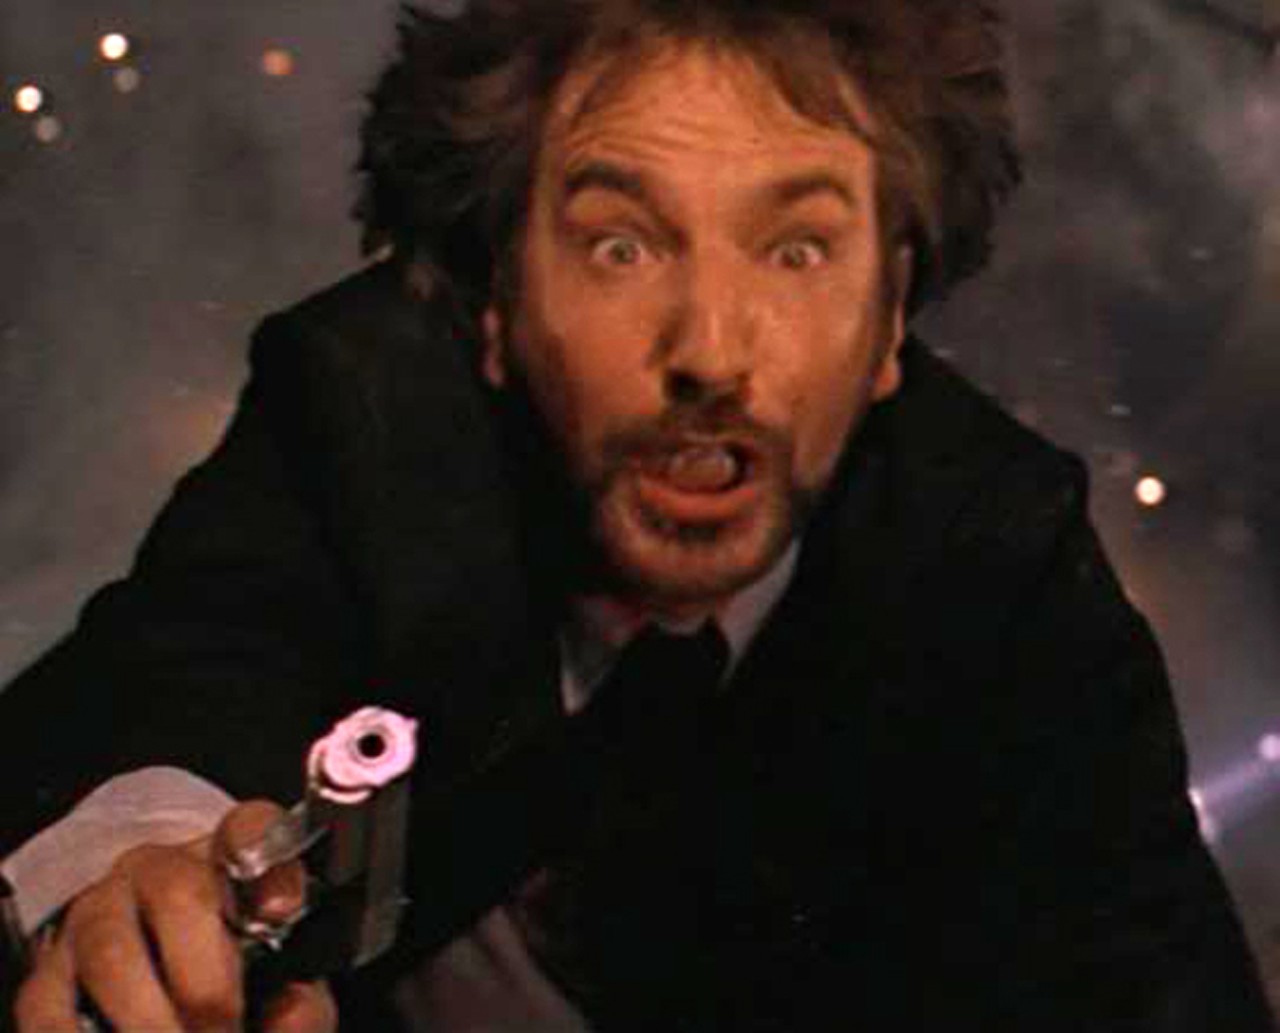 No Die Hard slideshow would be complete without the death of German terrorist Hans Gruber (Alan Rickman), who falls off the side of Nakatomi Tower on Christmas Eve at the end of the first film. Due to Gruber's mod-era mop of hair and nighttime demise, we suggest that the original Die Hard be given the Beatles-inspired subtitle A Hard Day's Night to Die Hard.